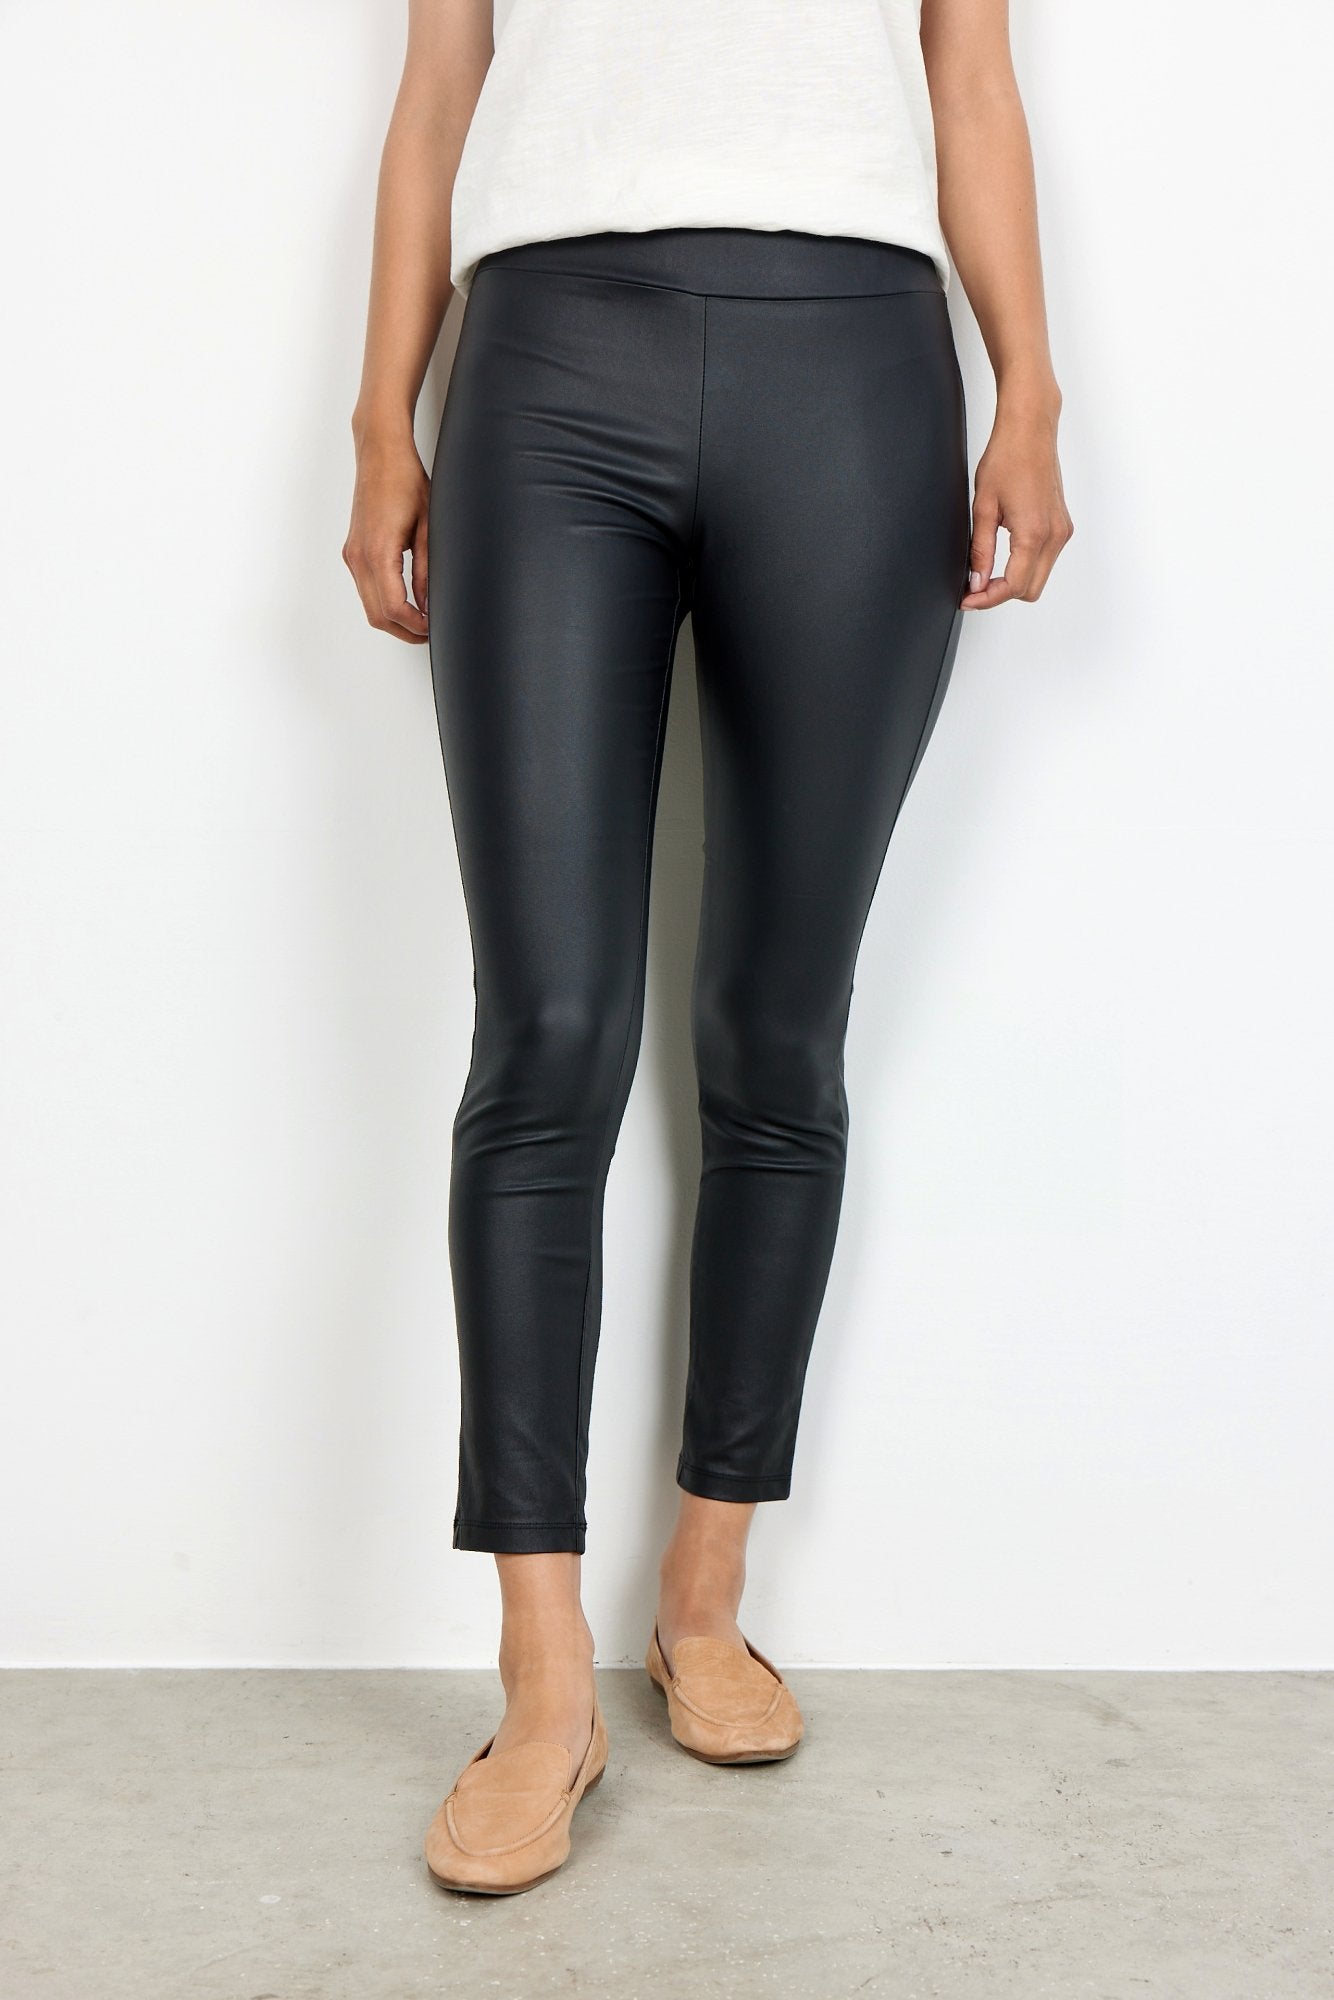 SC-PAM 2-B Pants in Black | soyaconcept – from soyaconcept Soyaconcept